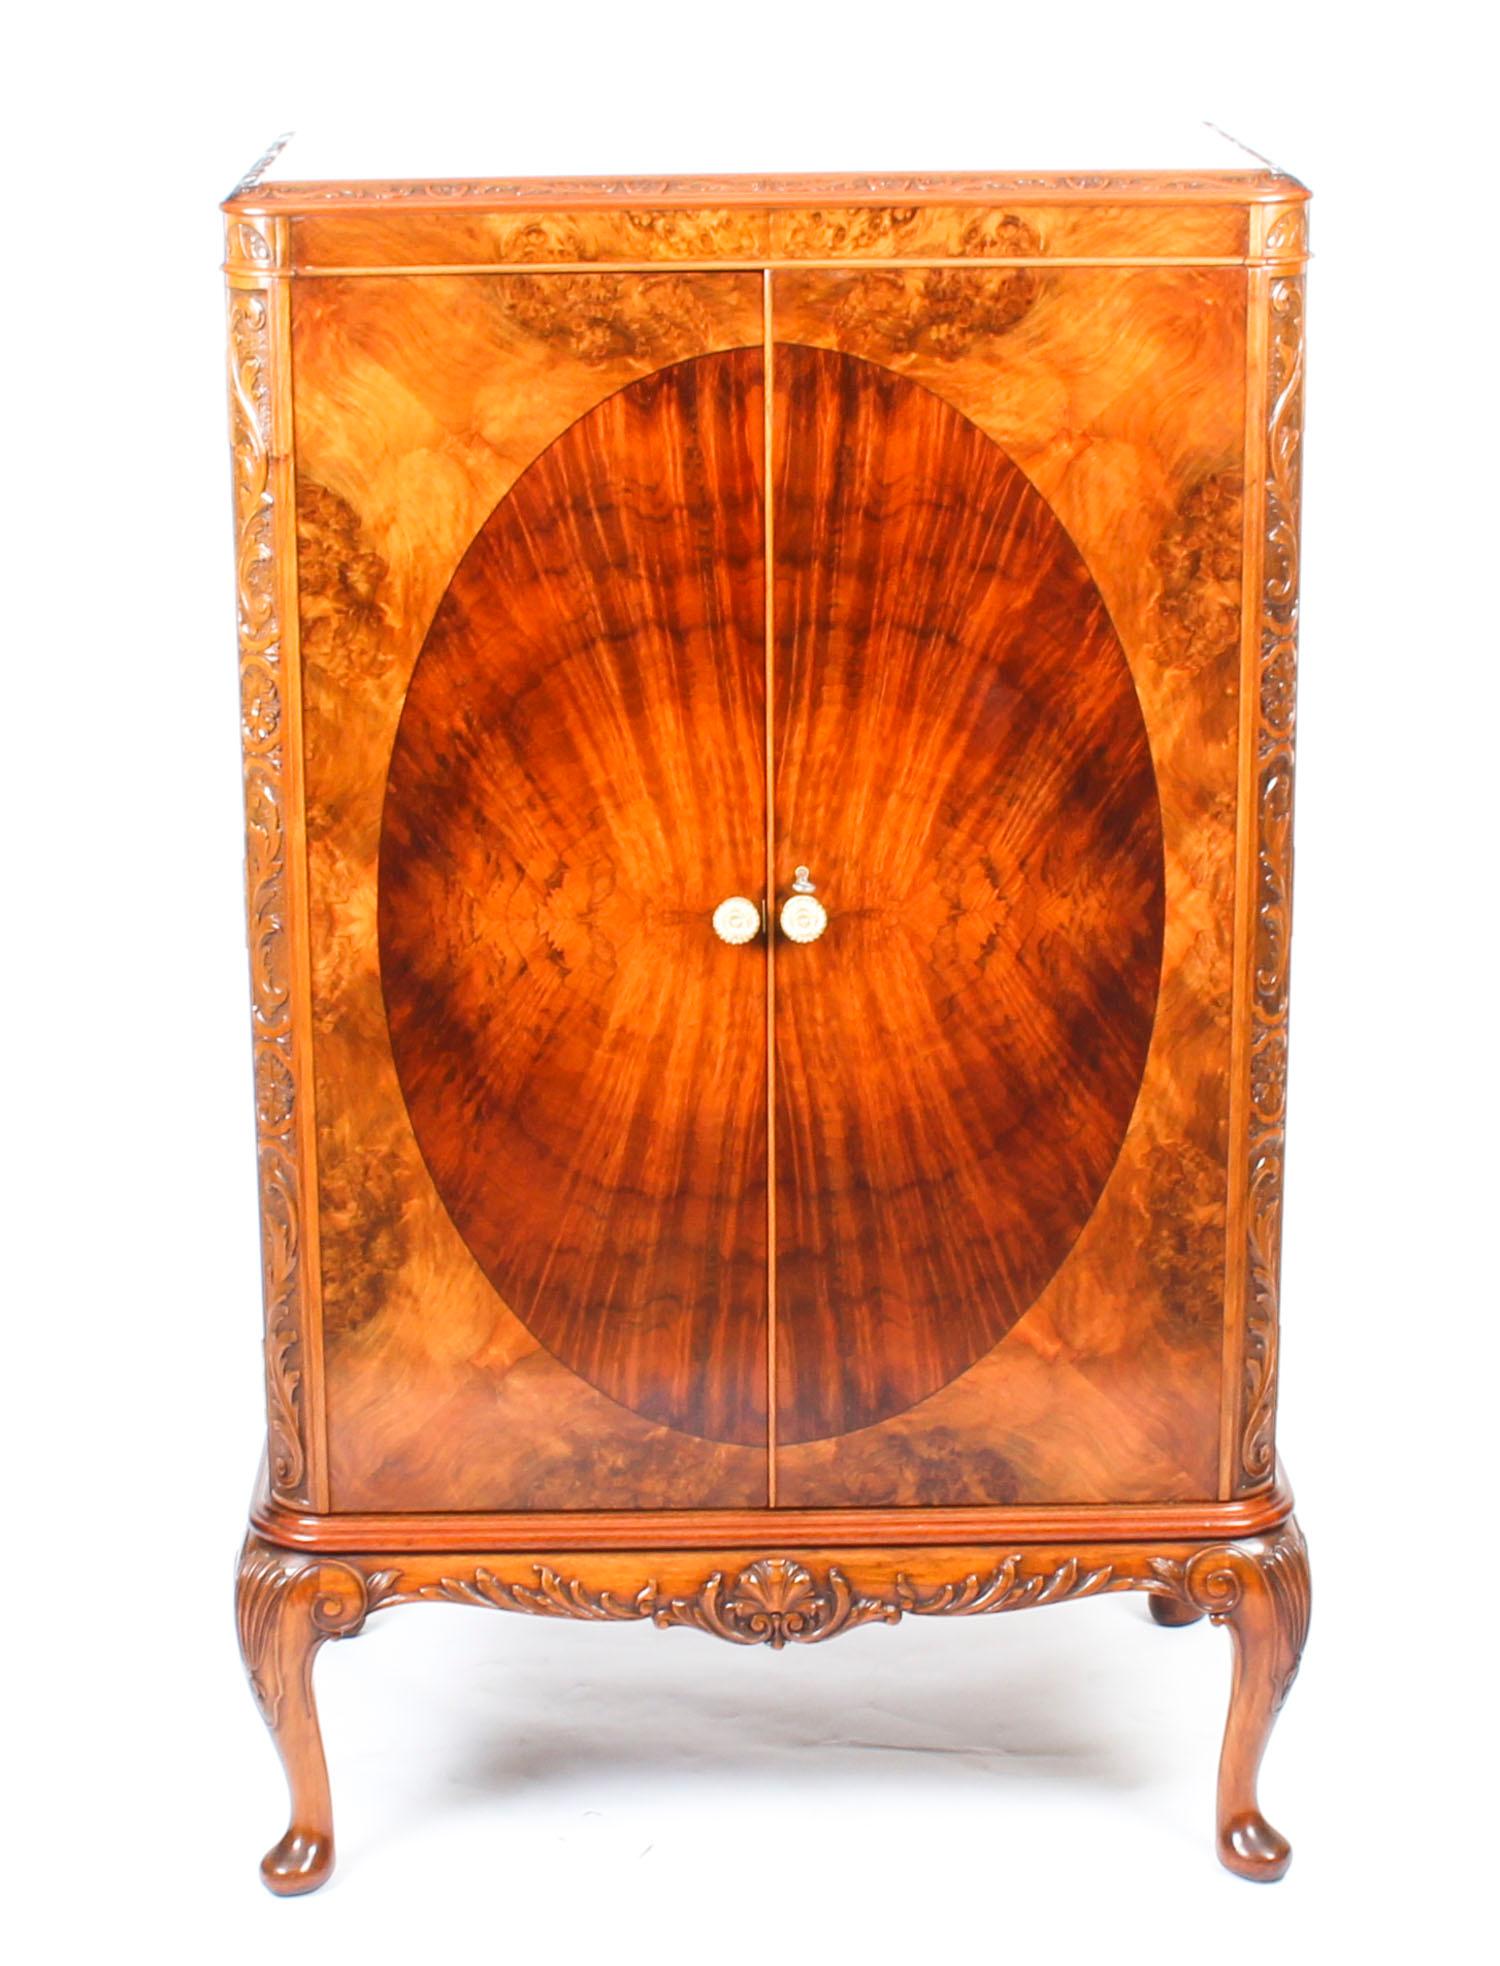 This fantastic vintage 1950s burr walnut cocktail cabinet with the original cut glass ware bears the label of the World renowned retailer, Harrods Ltd London, and dates from the mid-20th century.
 
The beautifully figured burr walnut cabinet has a